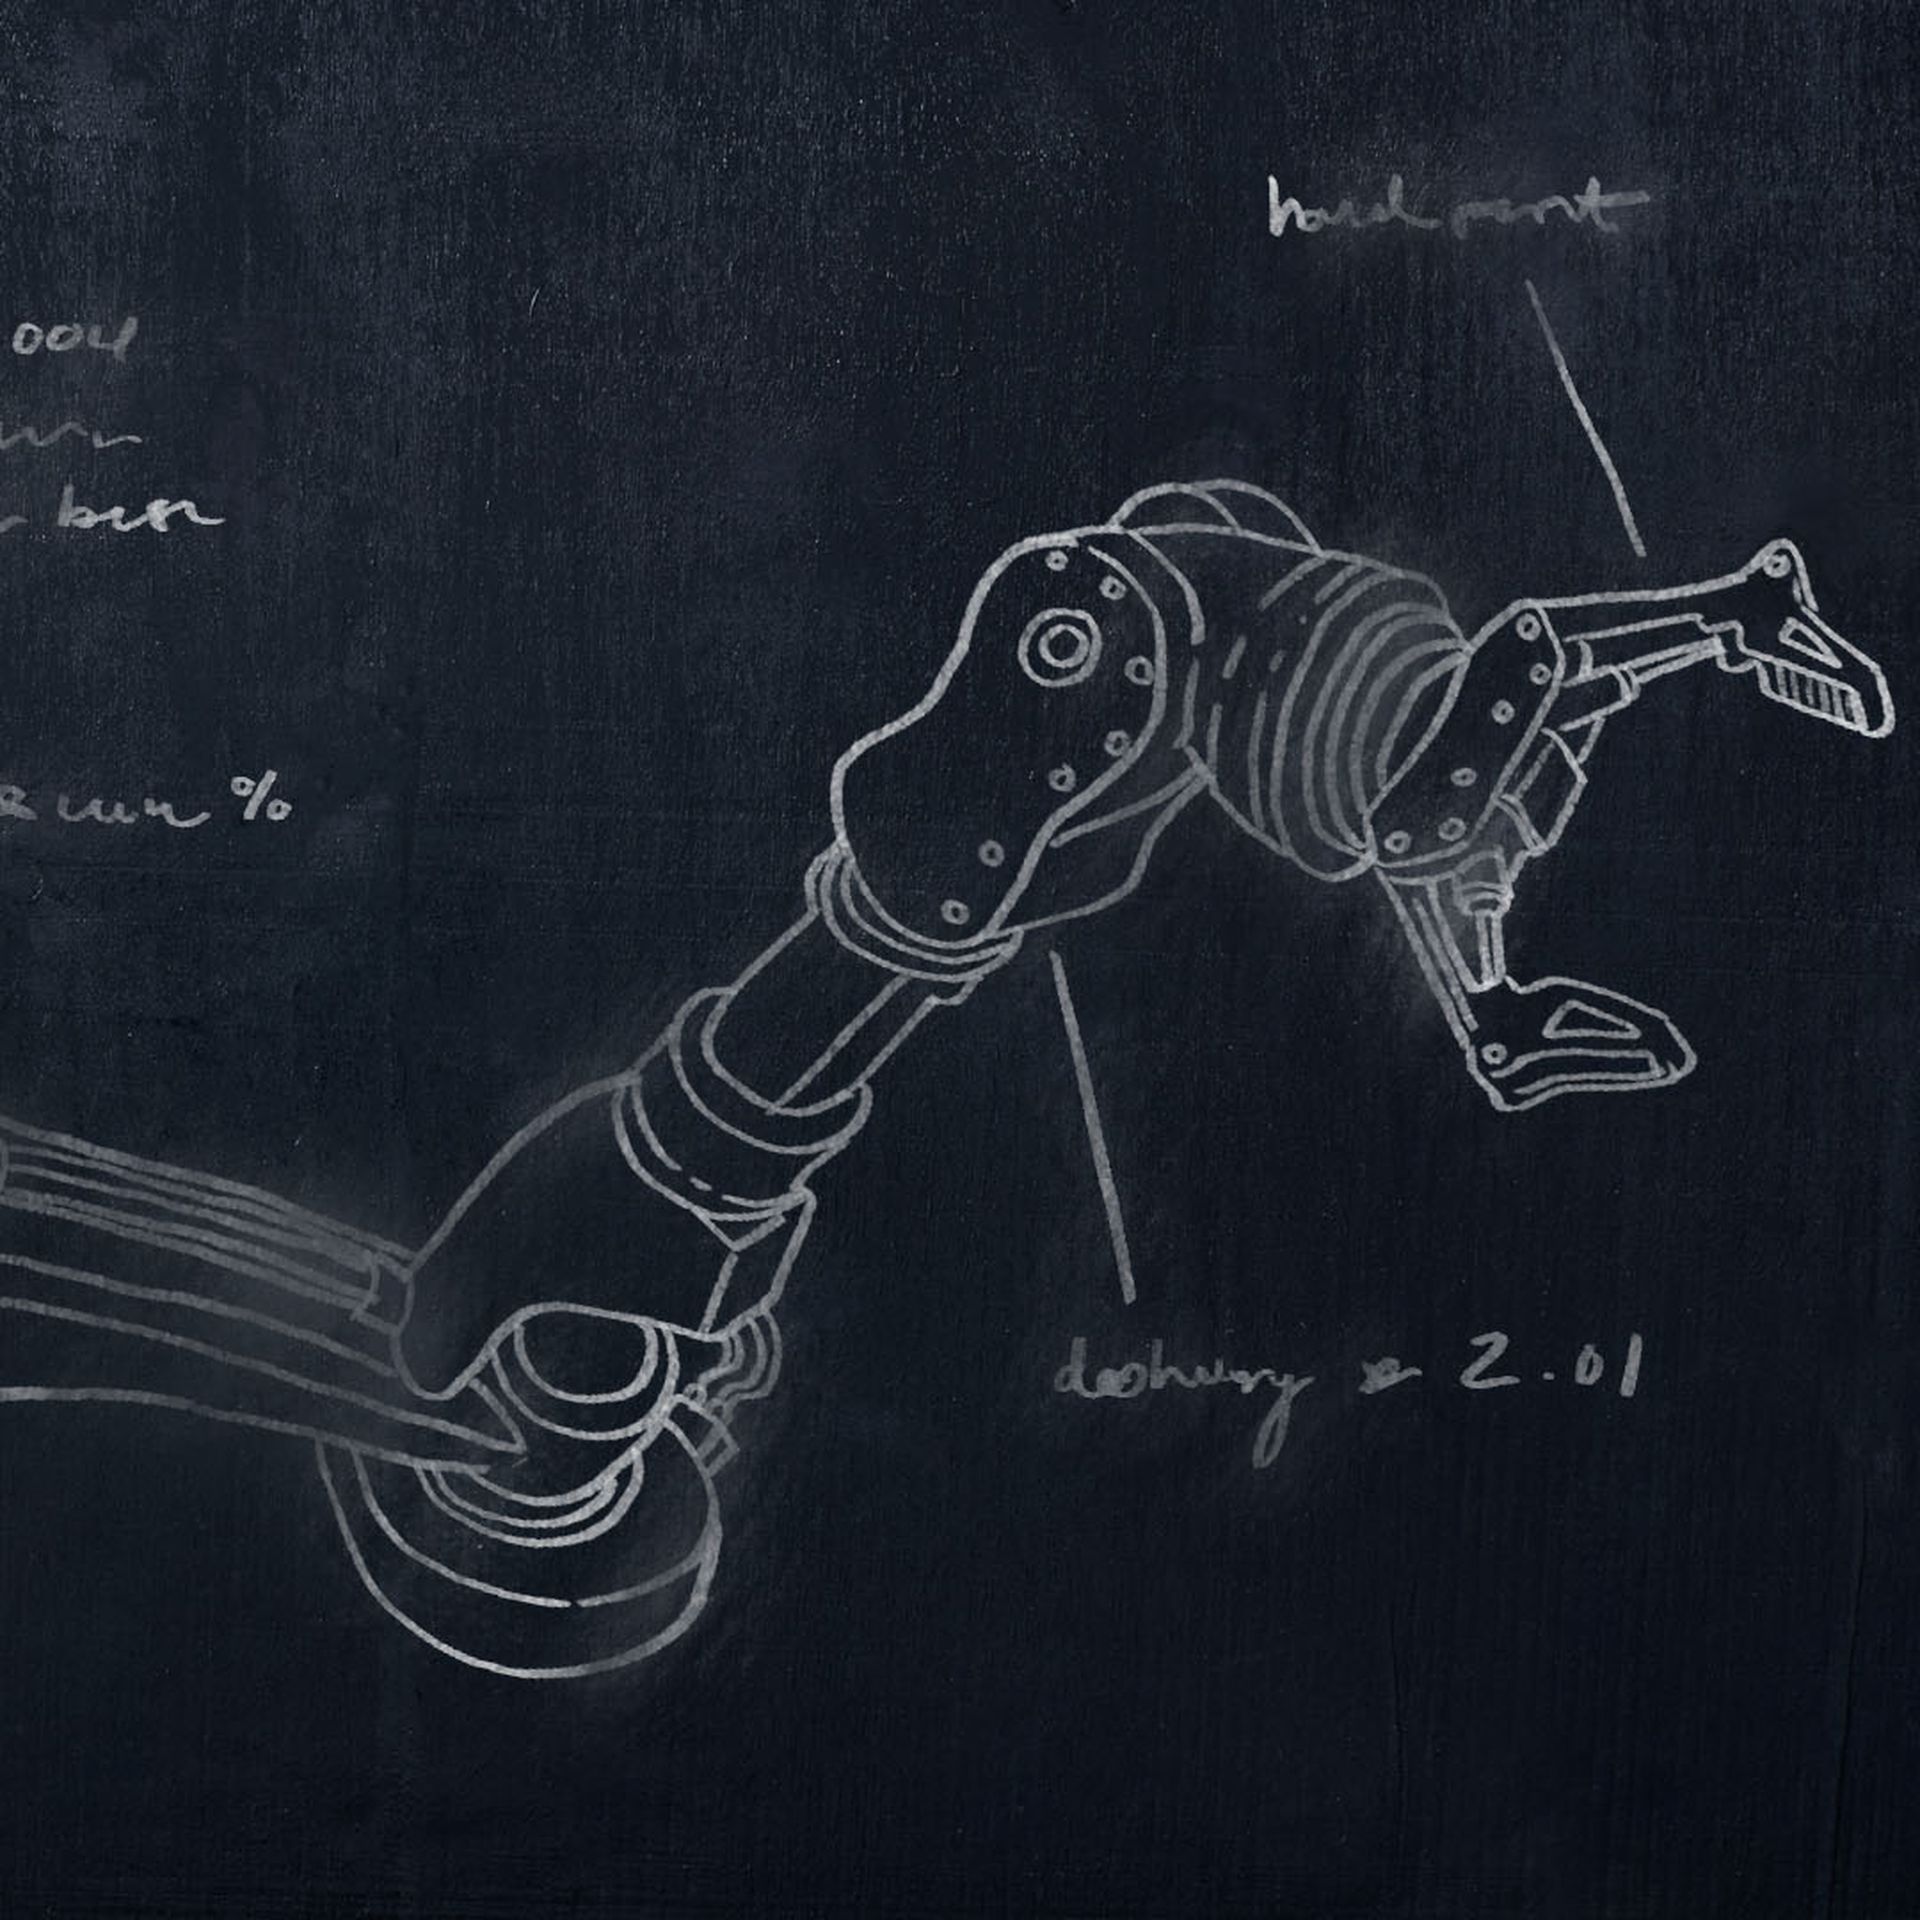 Illustration of a robot hand diagram on a chalkboard